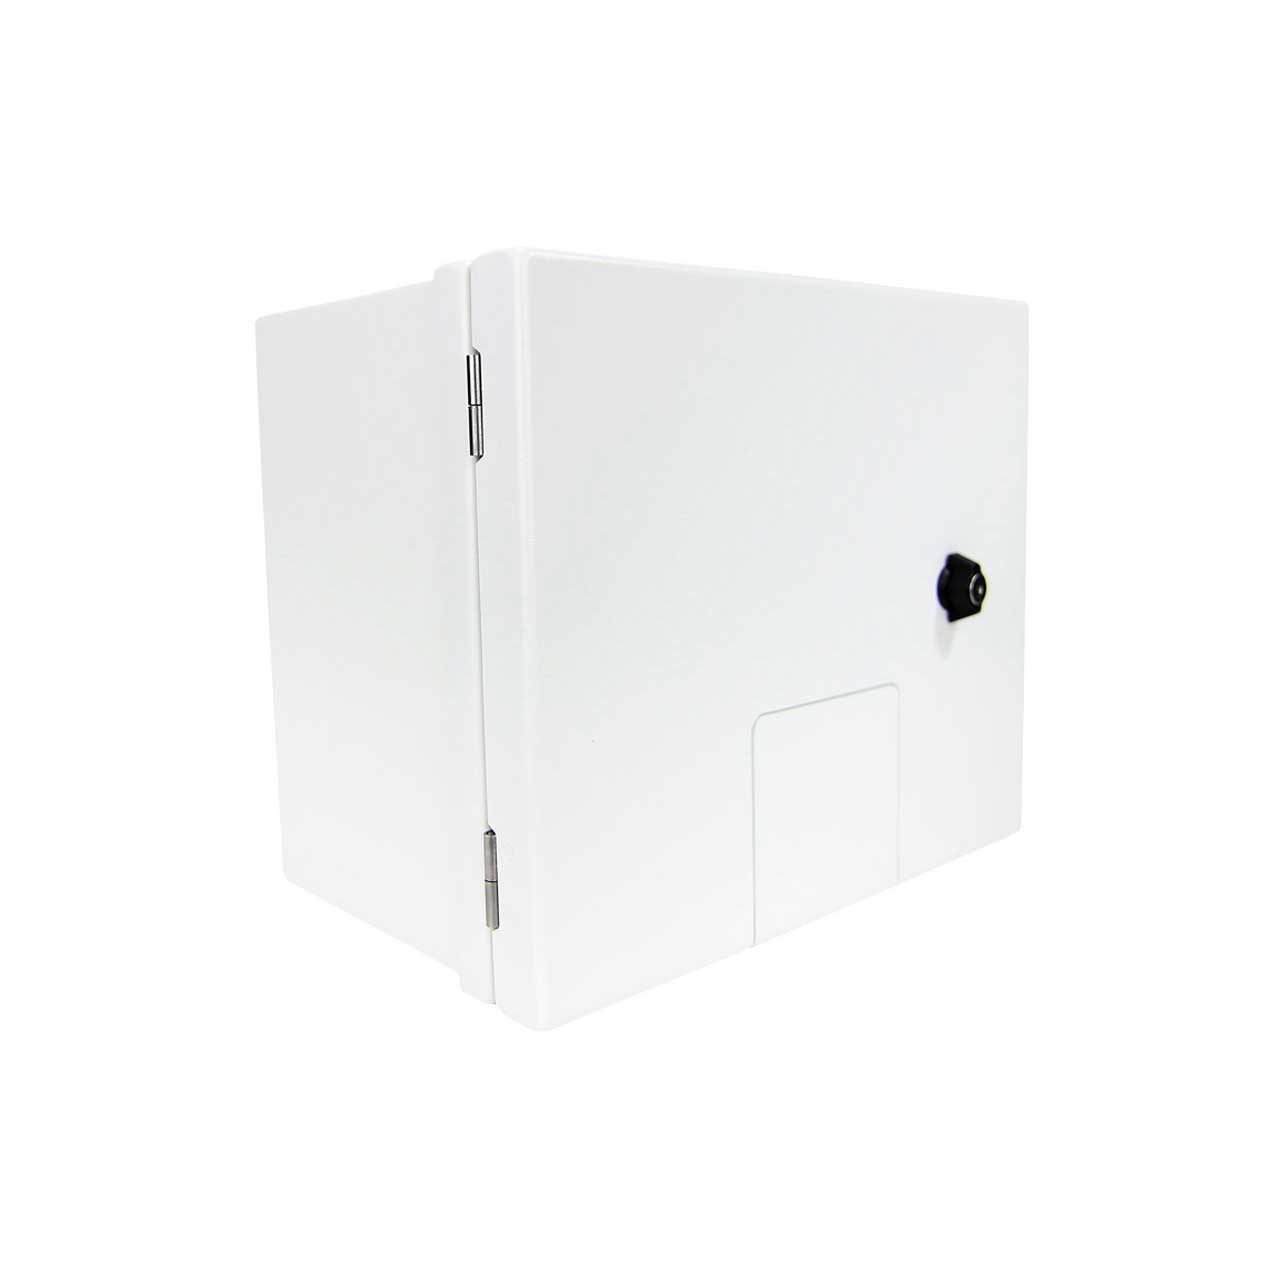 FSR OWB-500P-SM Outdoor Wall Box & Cover for the FL-500P Floor Box - Surface Mount  OWB-500P-SM